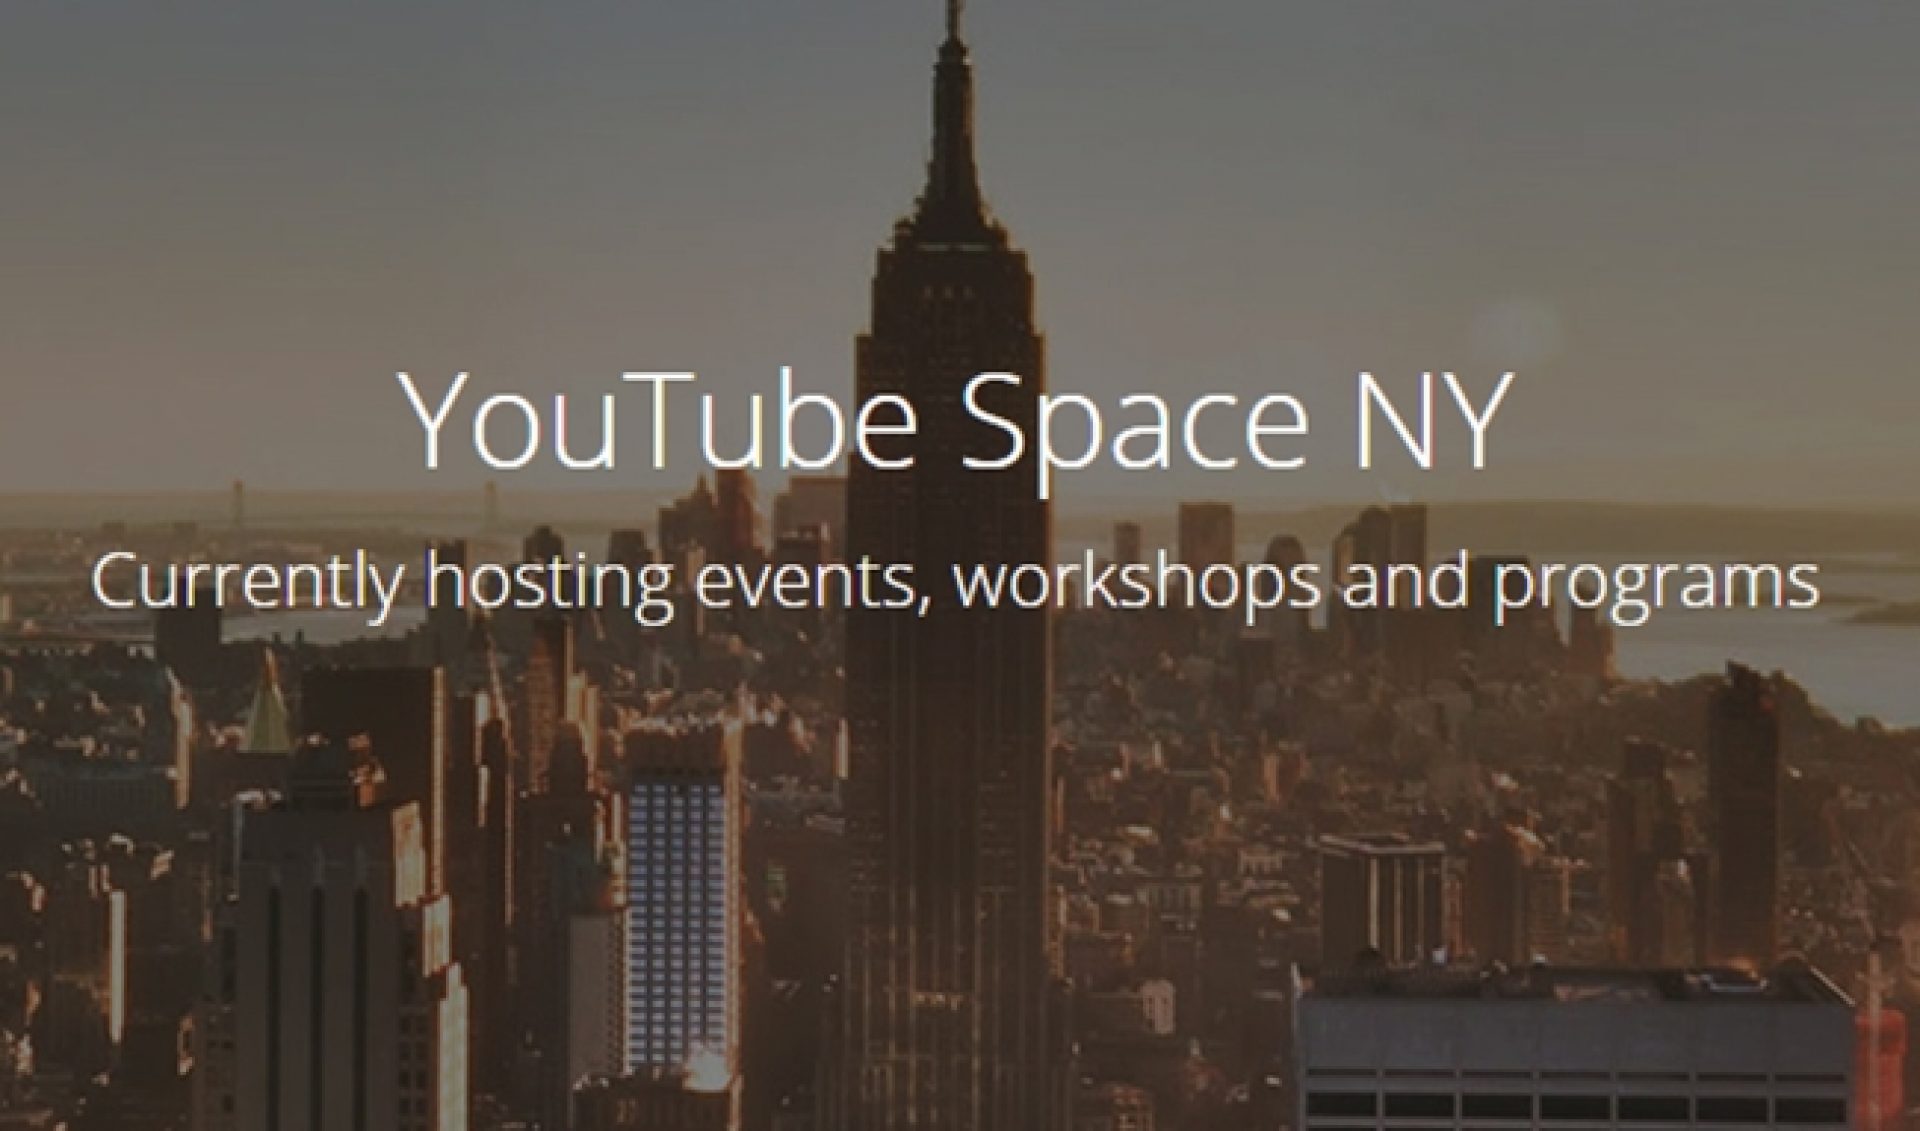 YouTube To Open Creator Space In New York In November